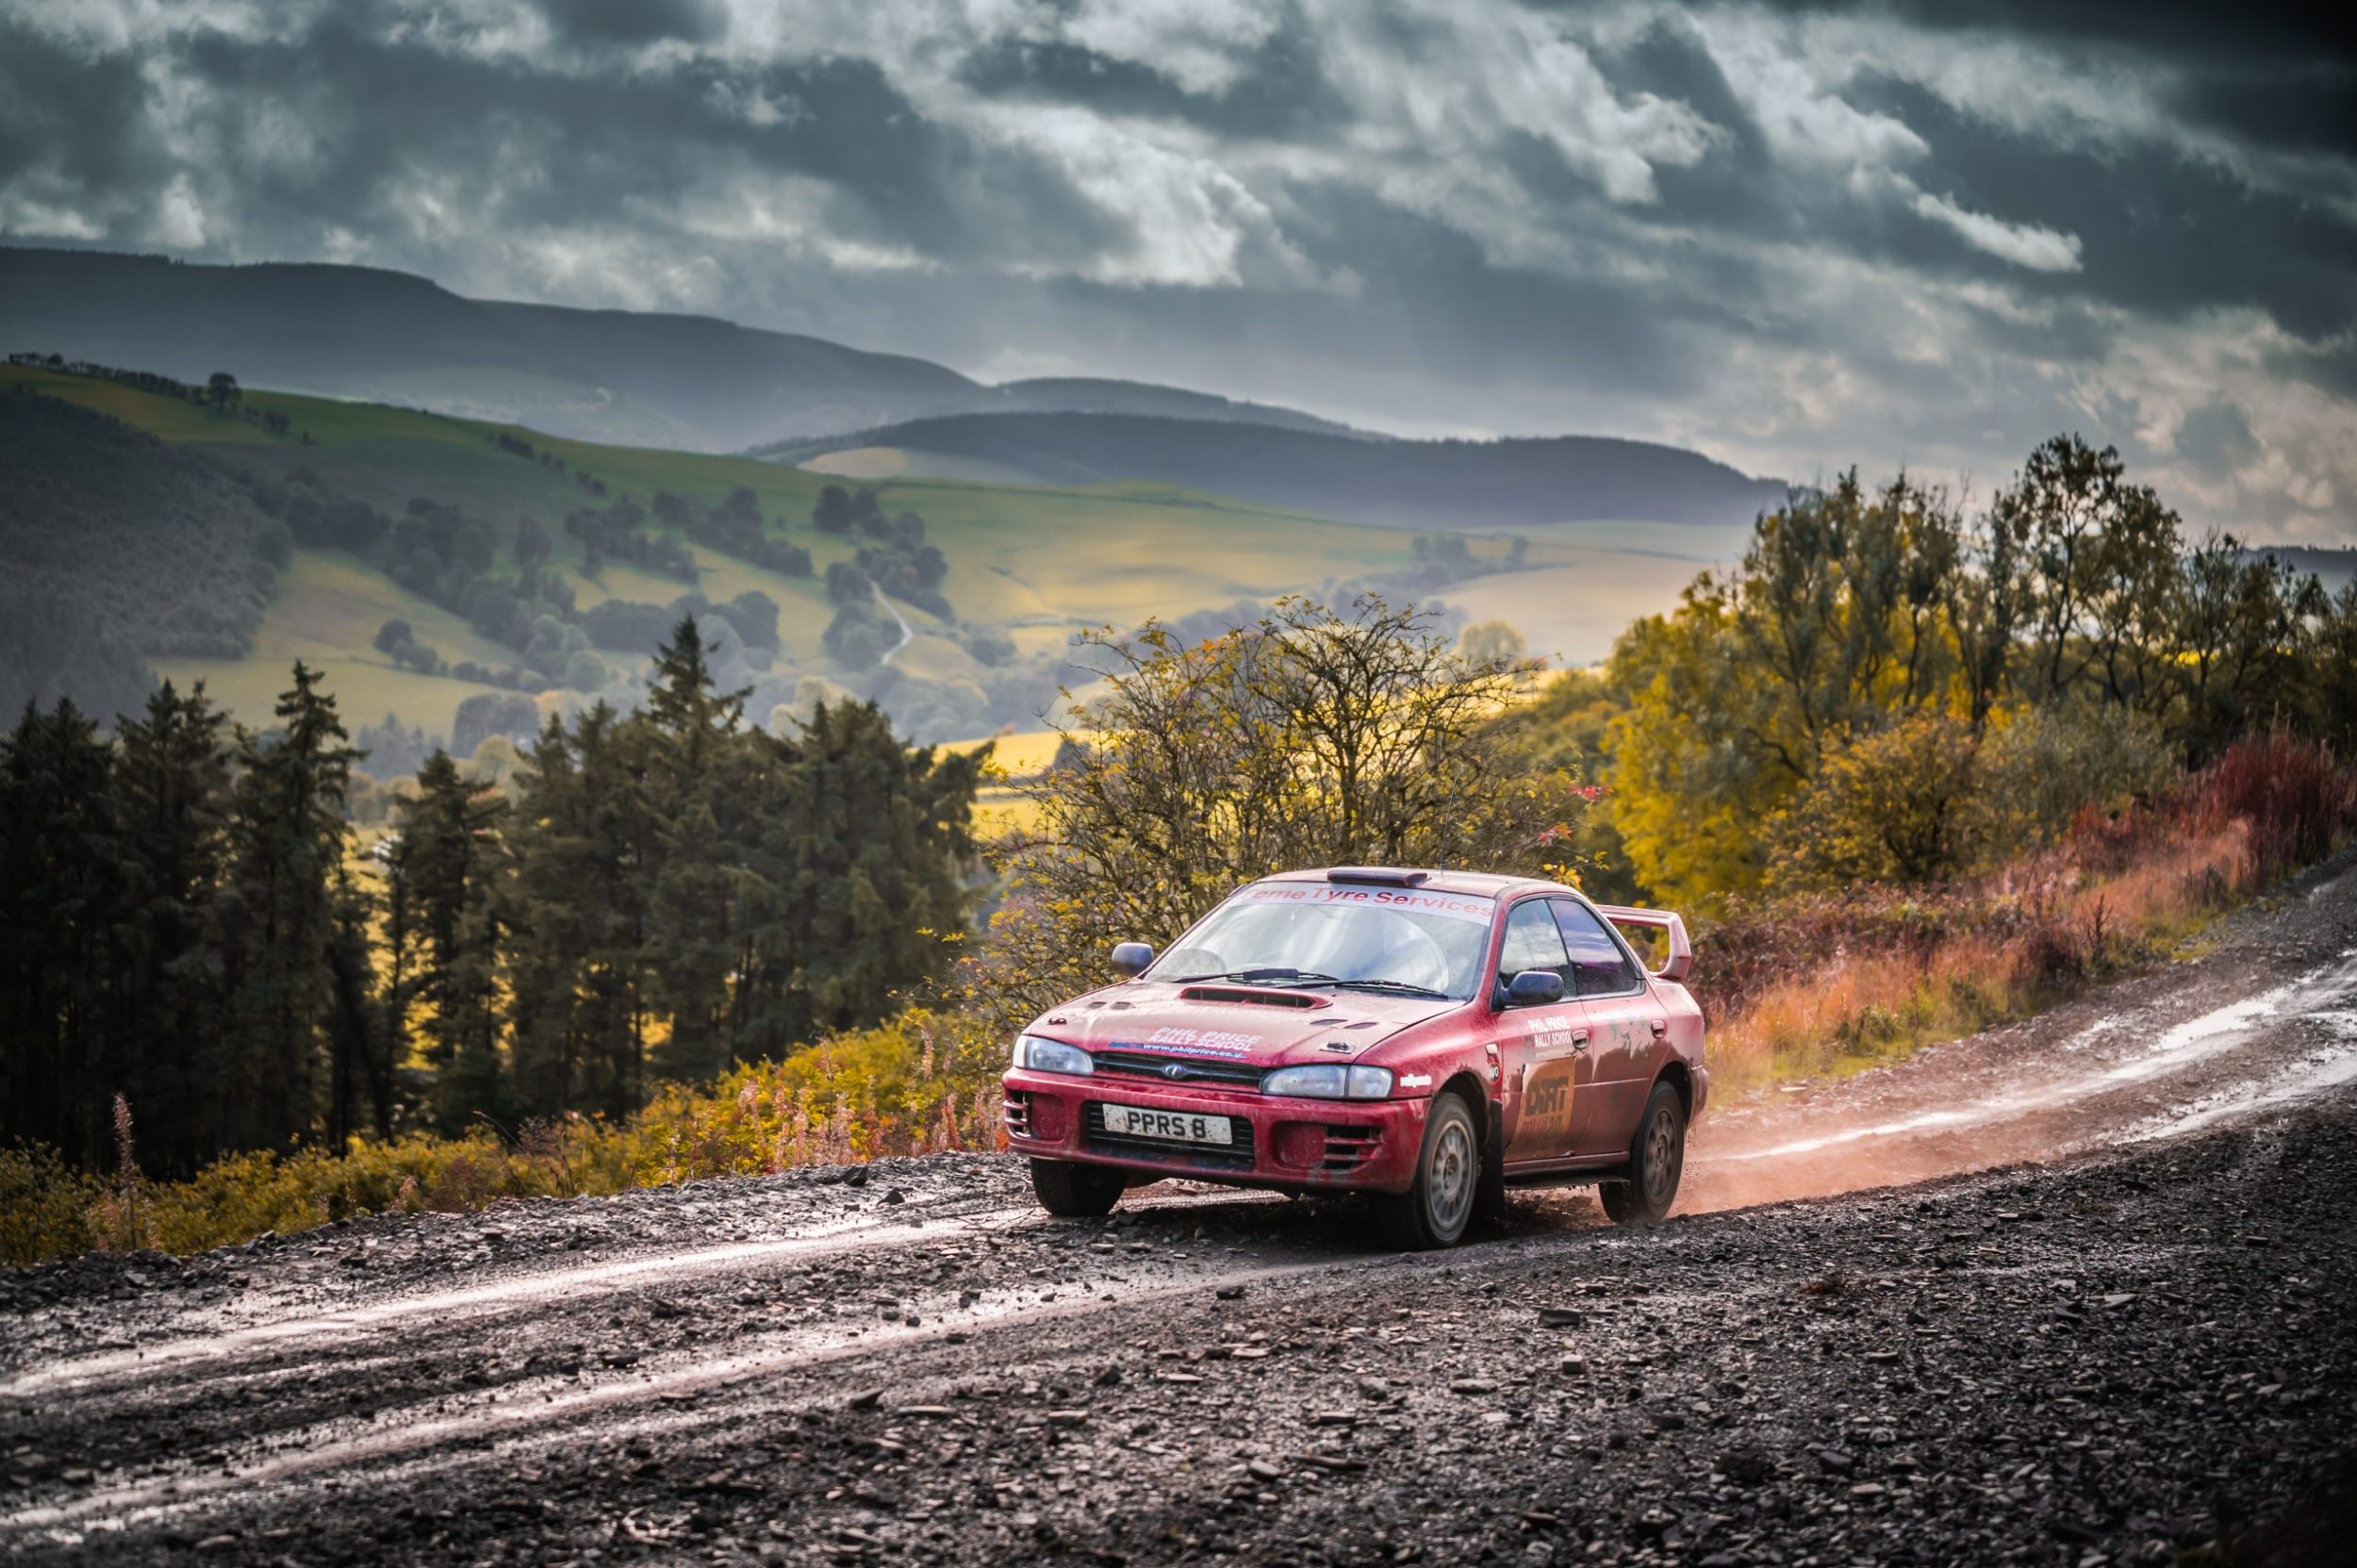 The Ultimate Driving Course in Powys, Wales